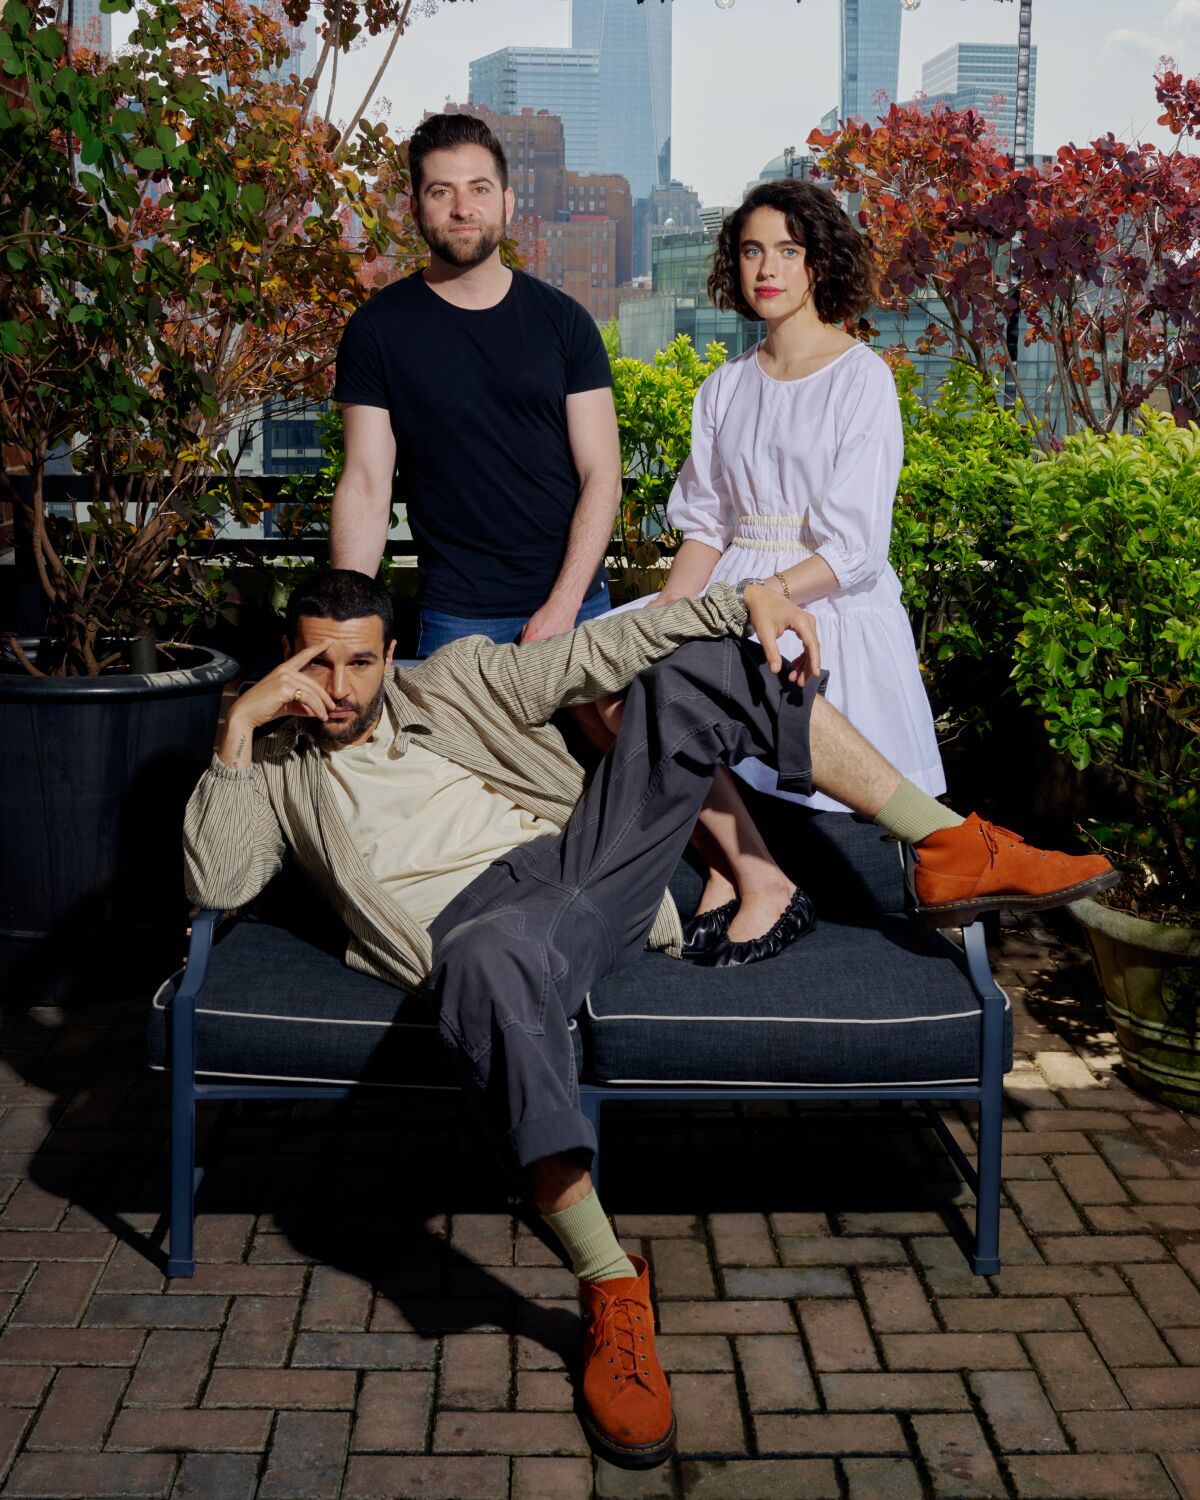 A man and a woman stand behind a man reclining on an outdoor couch, with the New York City skyline in the background.